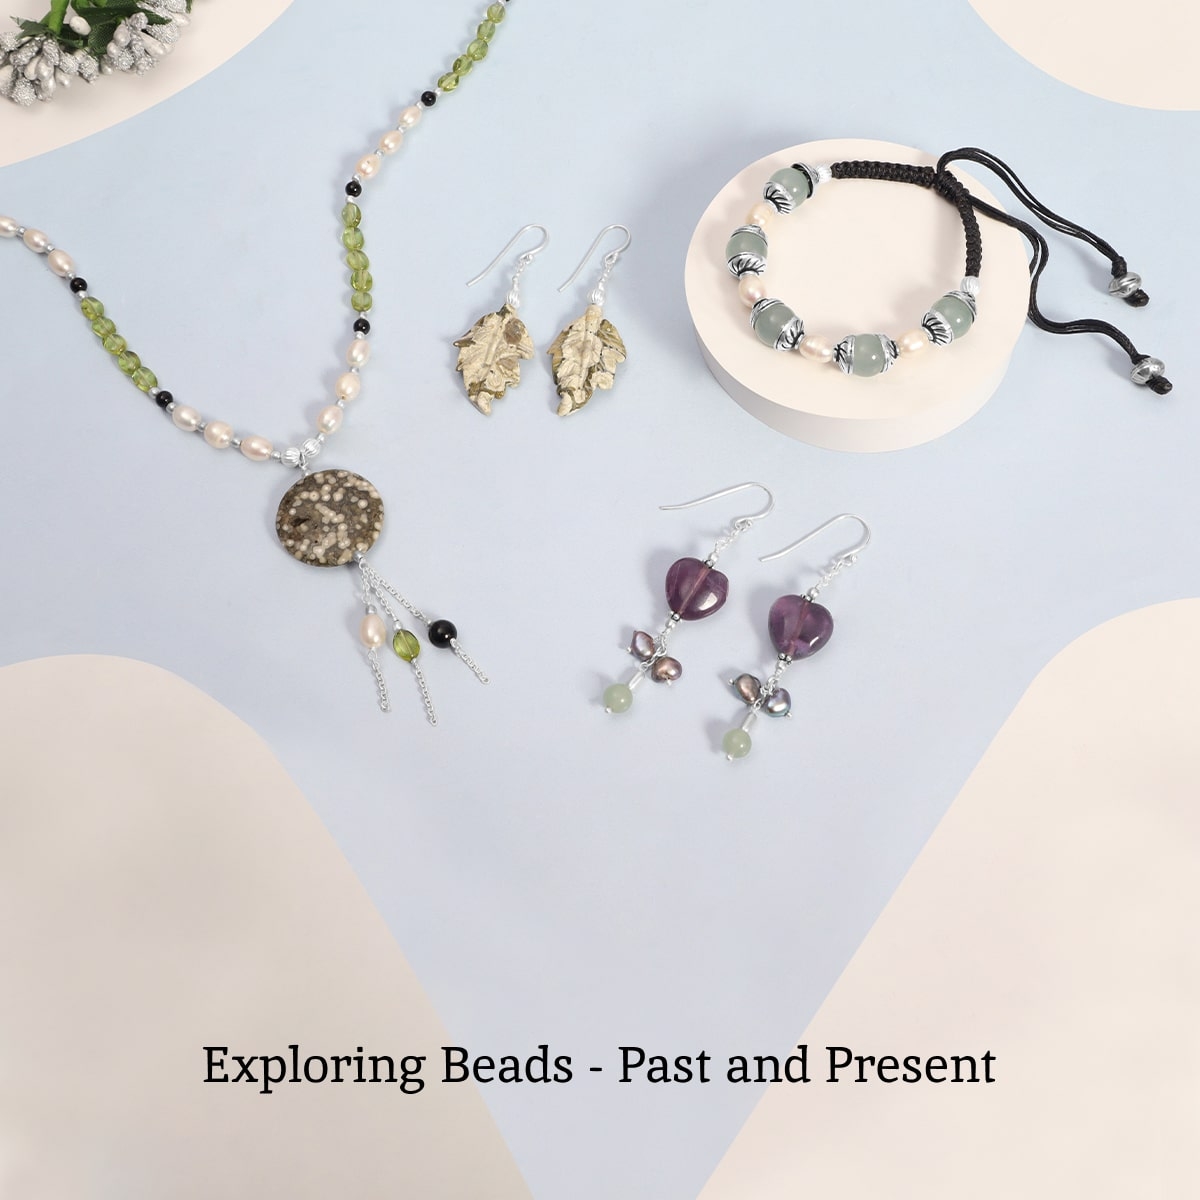 Beads Jewelry Meaning, History, Benefits, Types, and Healing